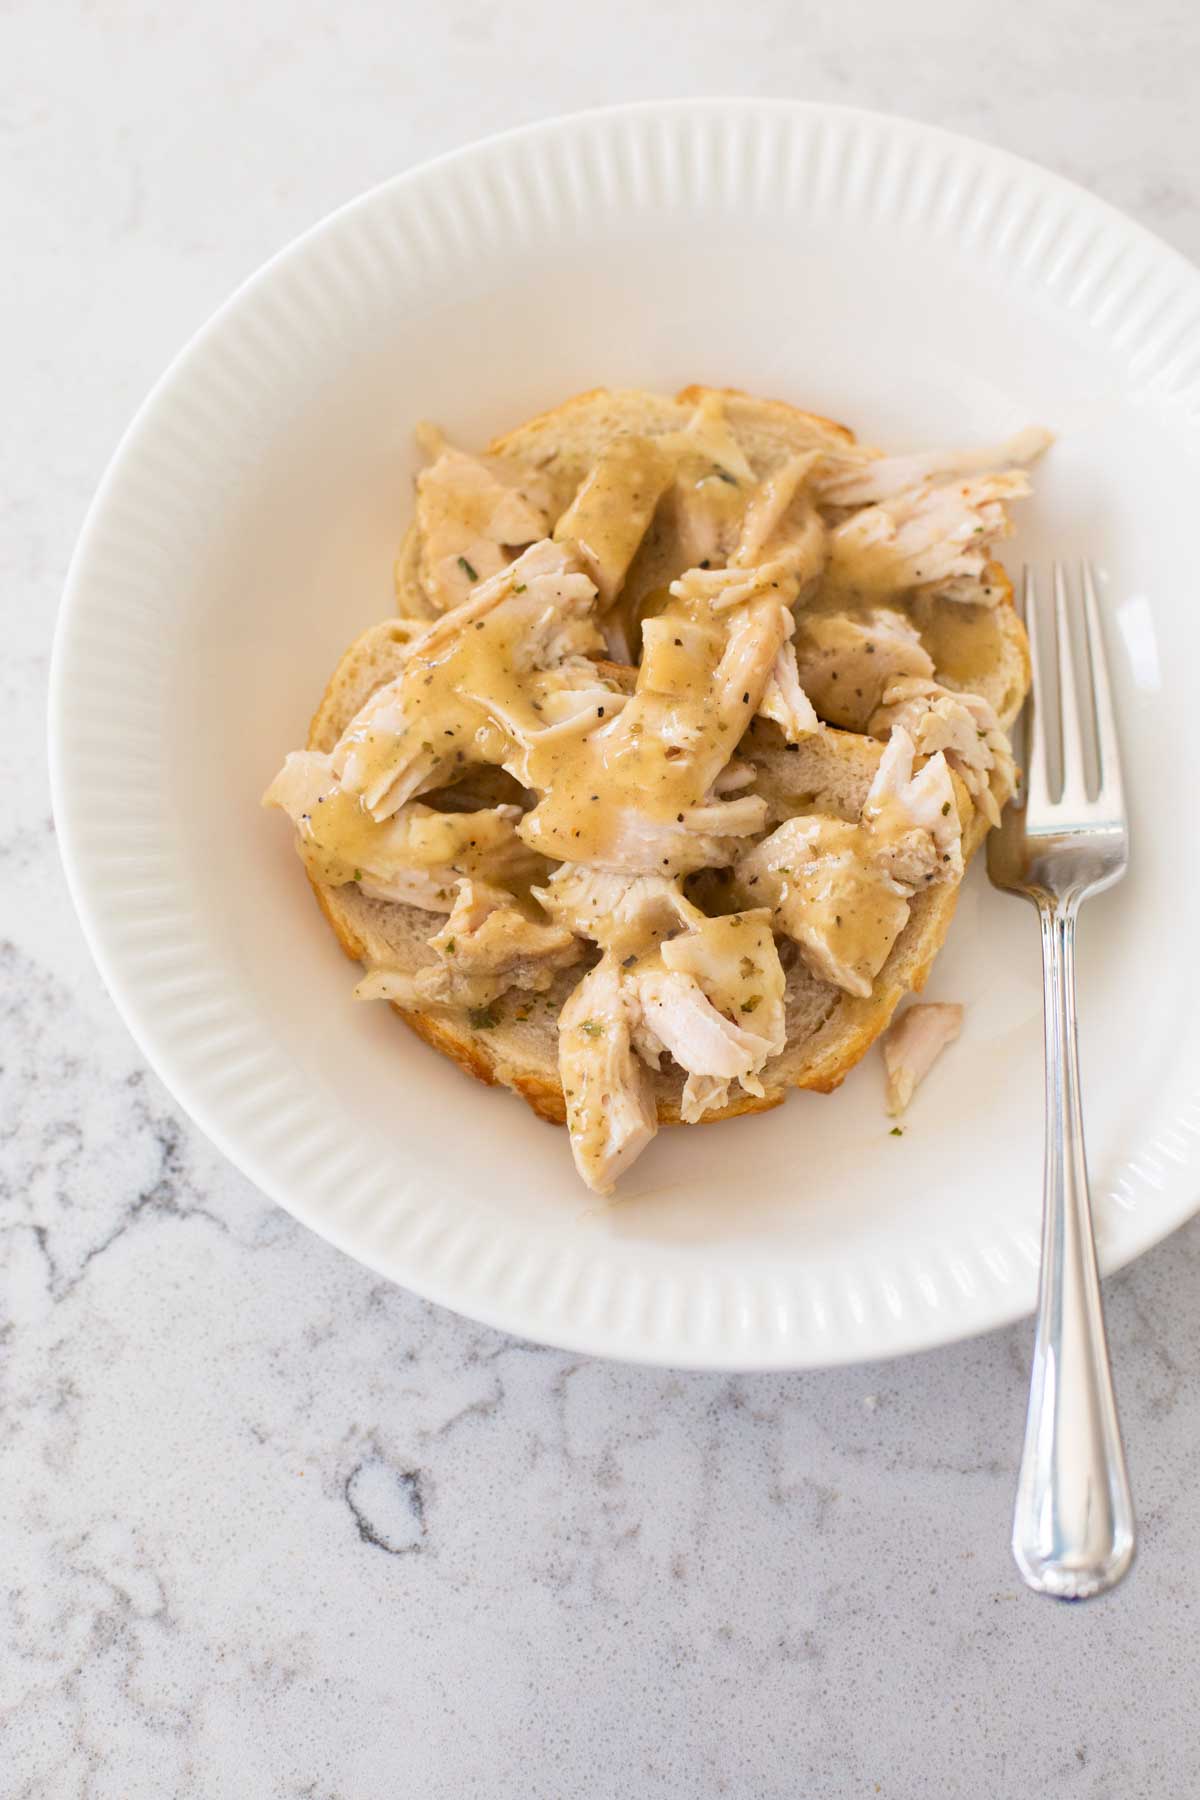 A bowl filled with an open face turkey sandwich has a fork on the side.